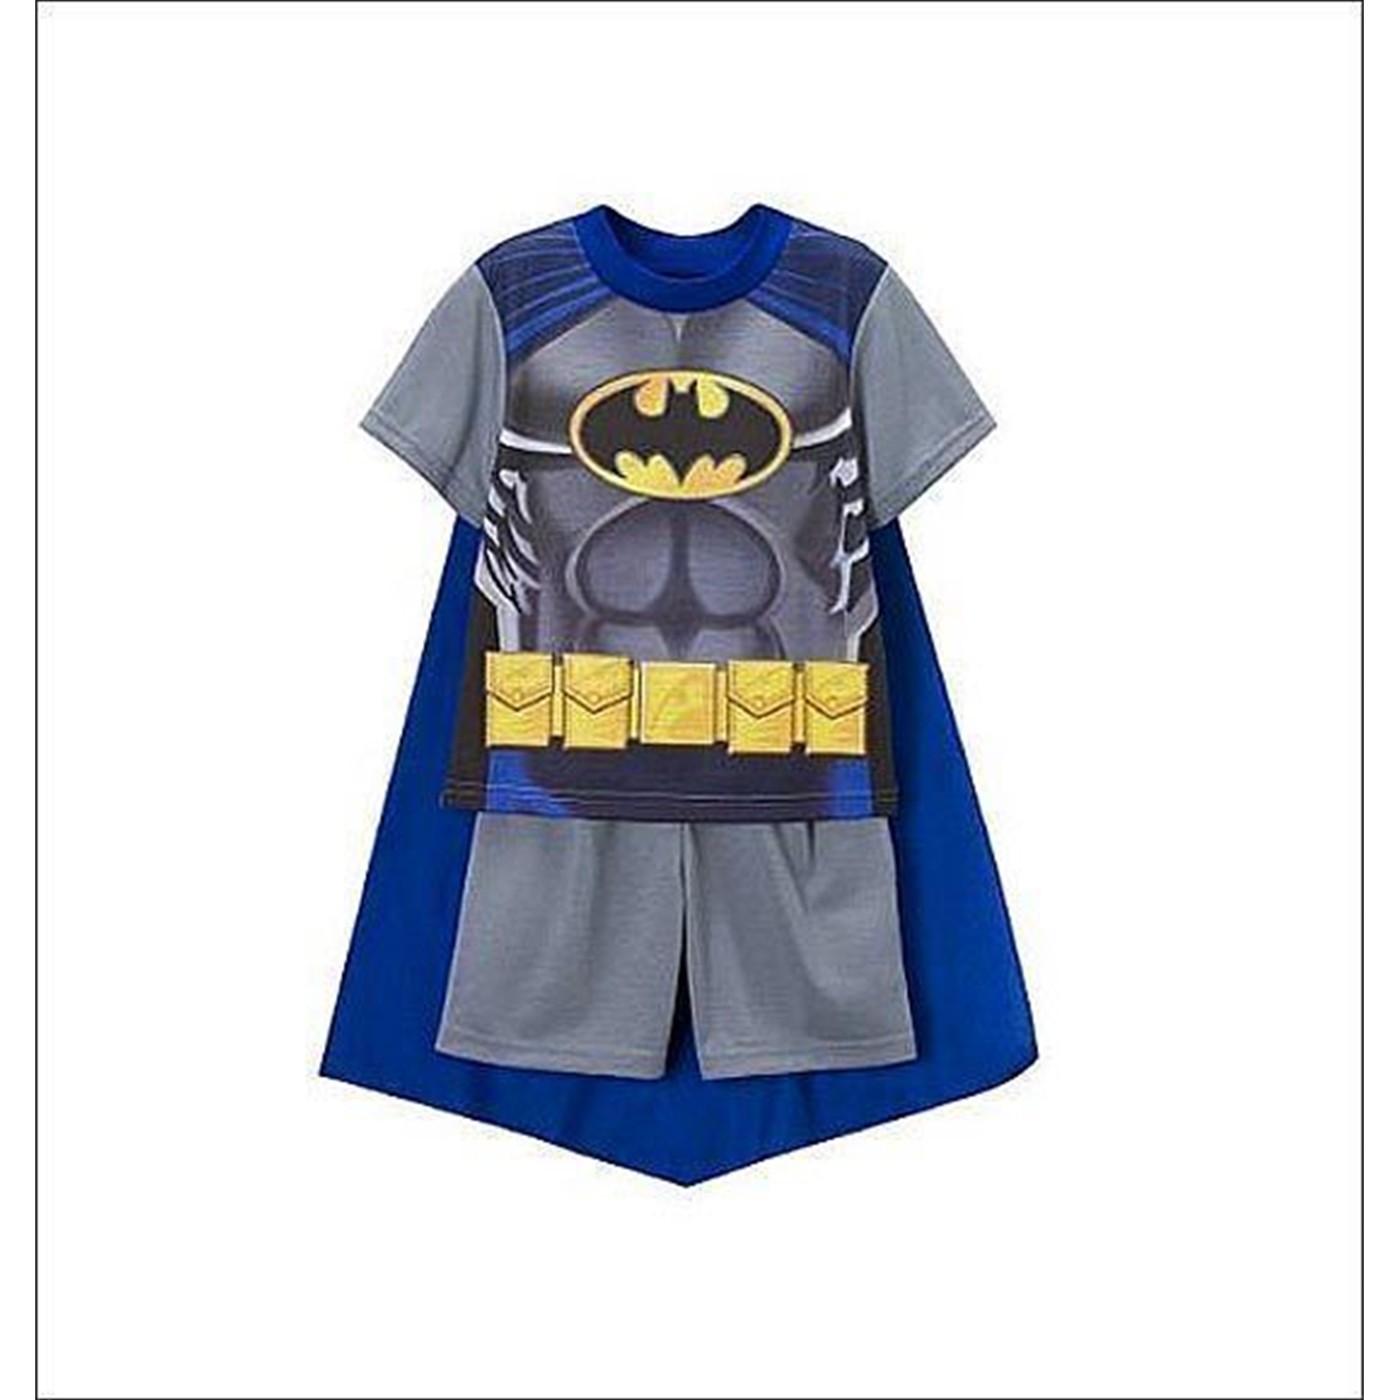 Batman Youth 2 Piece Pajama Set with Removeable Cape